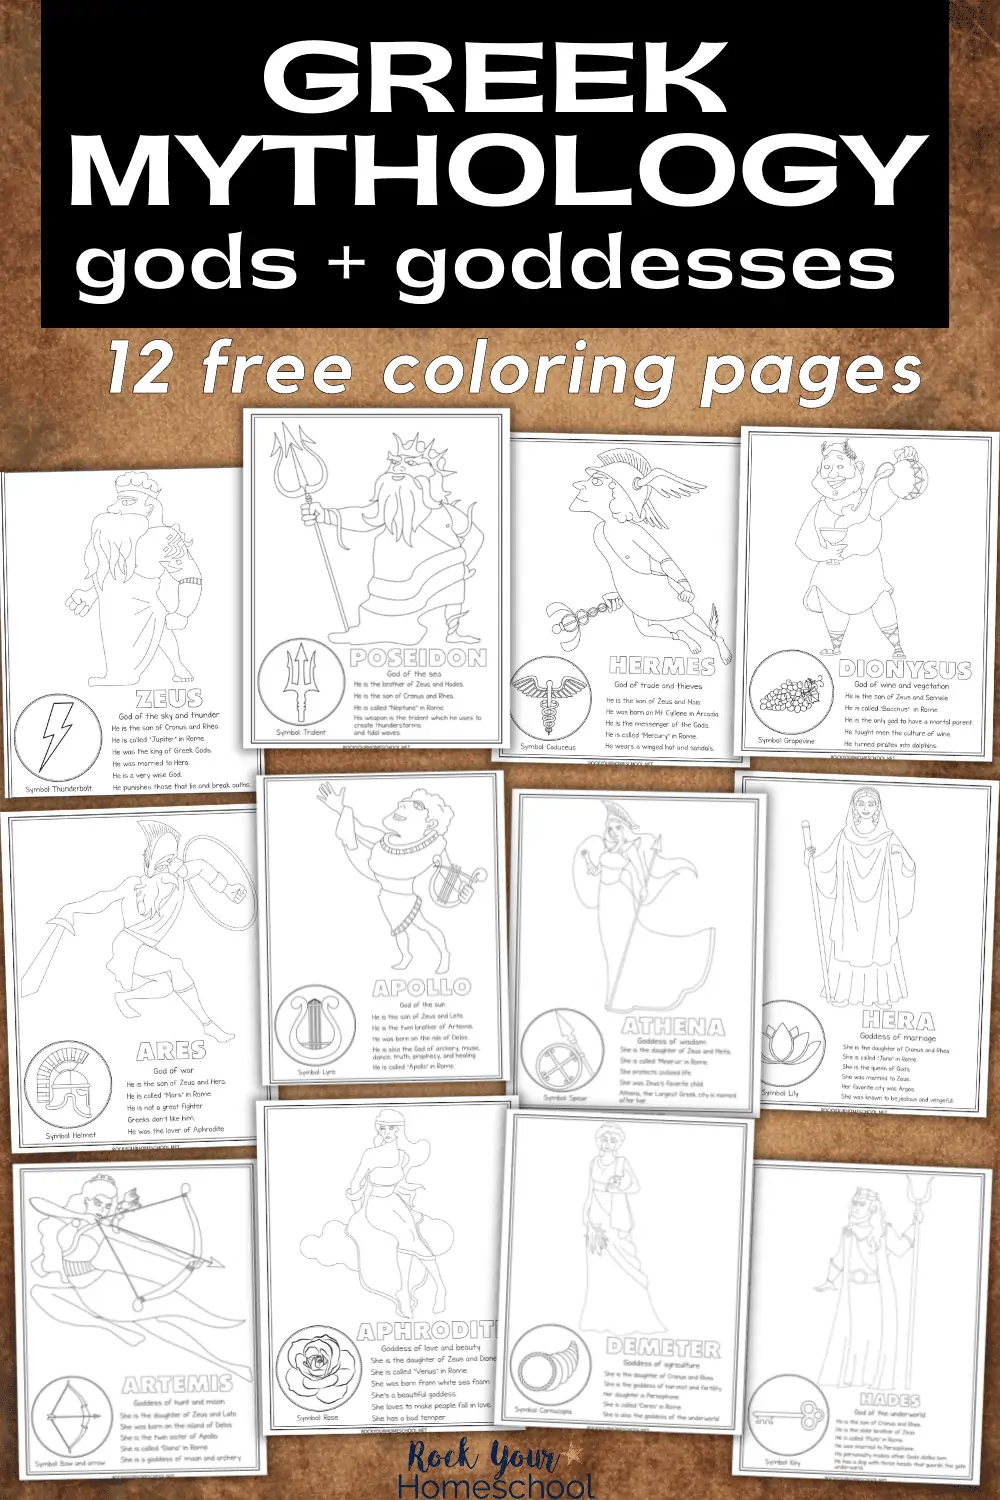 Greek Mythology Coloring Pages Plus Facts: Gods and Goddesses (12 Free)